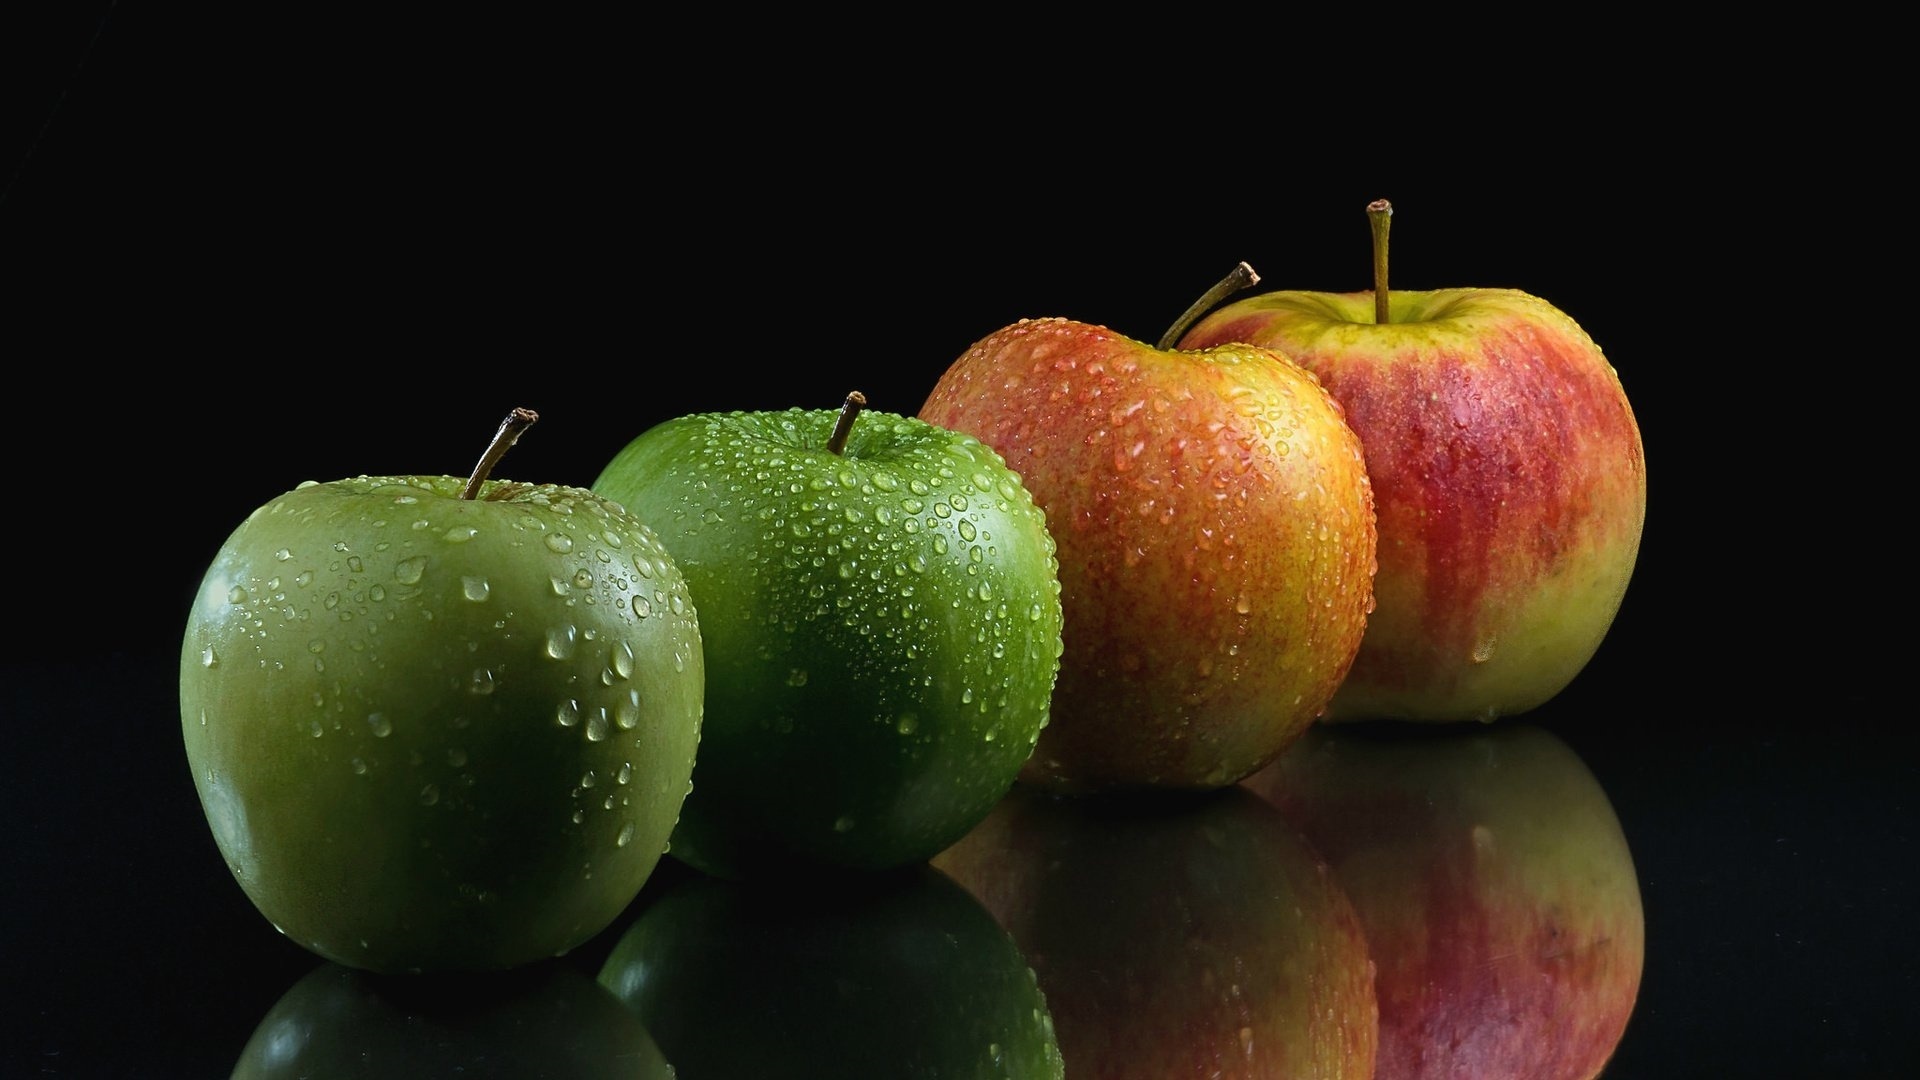 Apple (Fruit): A good source of soluble and insoluble fiber, Staple food. 1920x1080 Full HD Wallpaper.